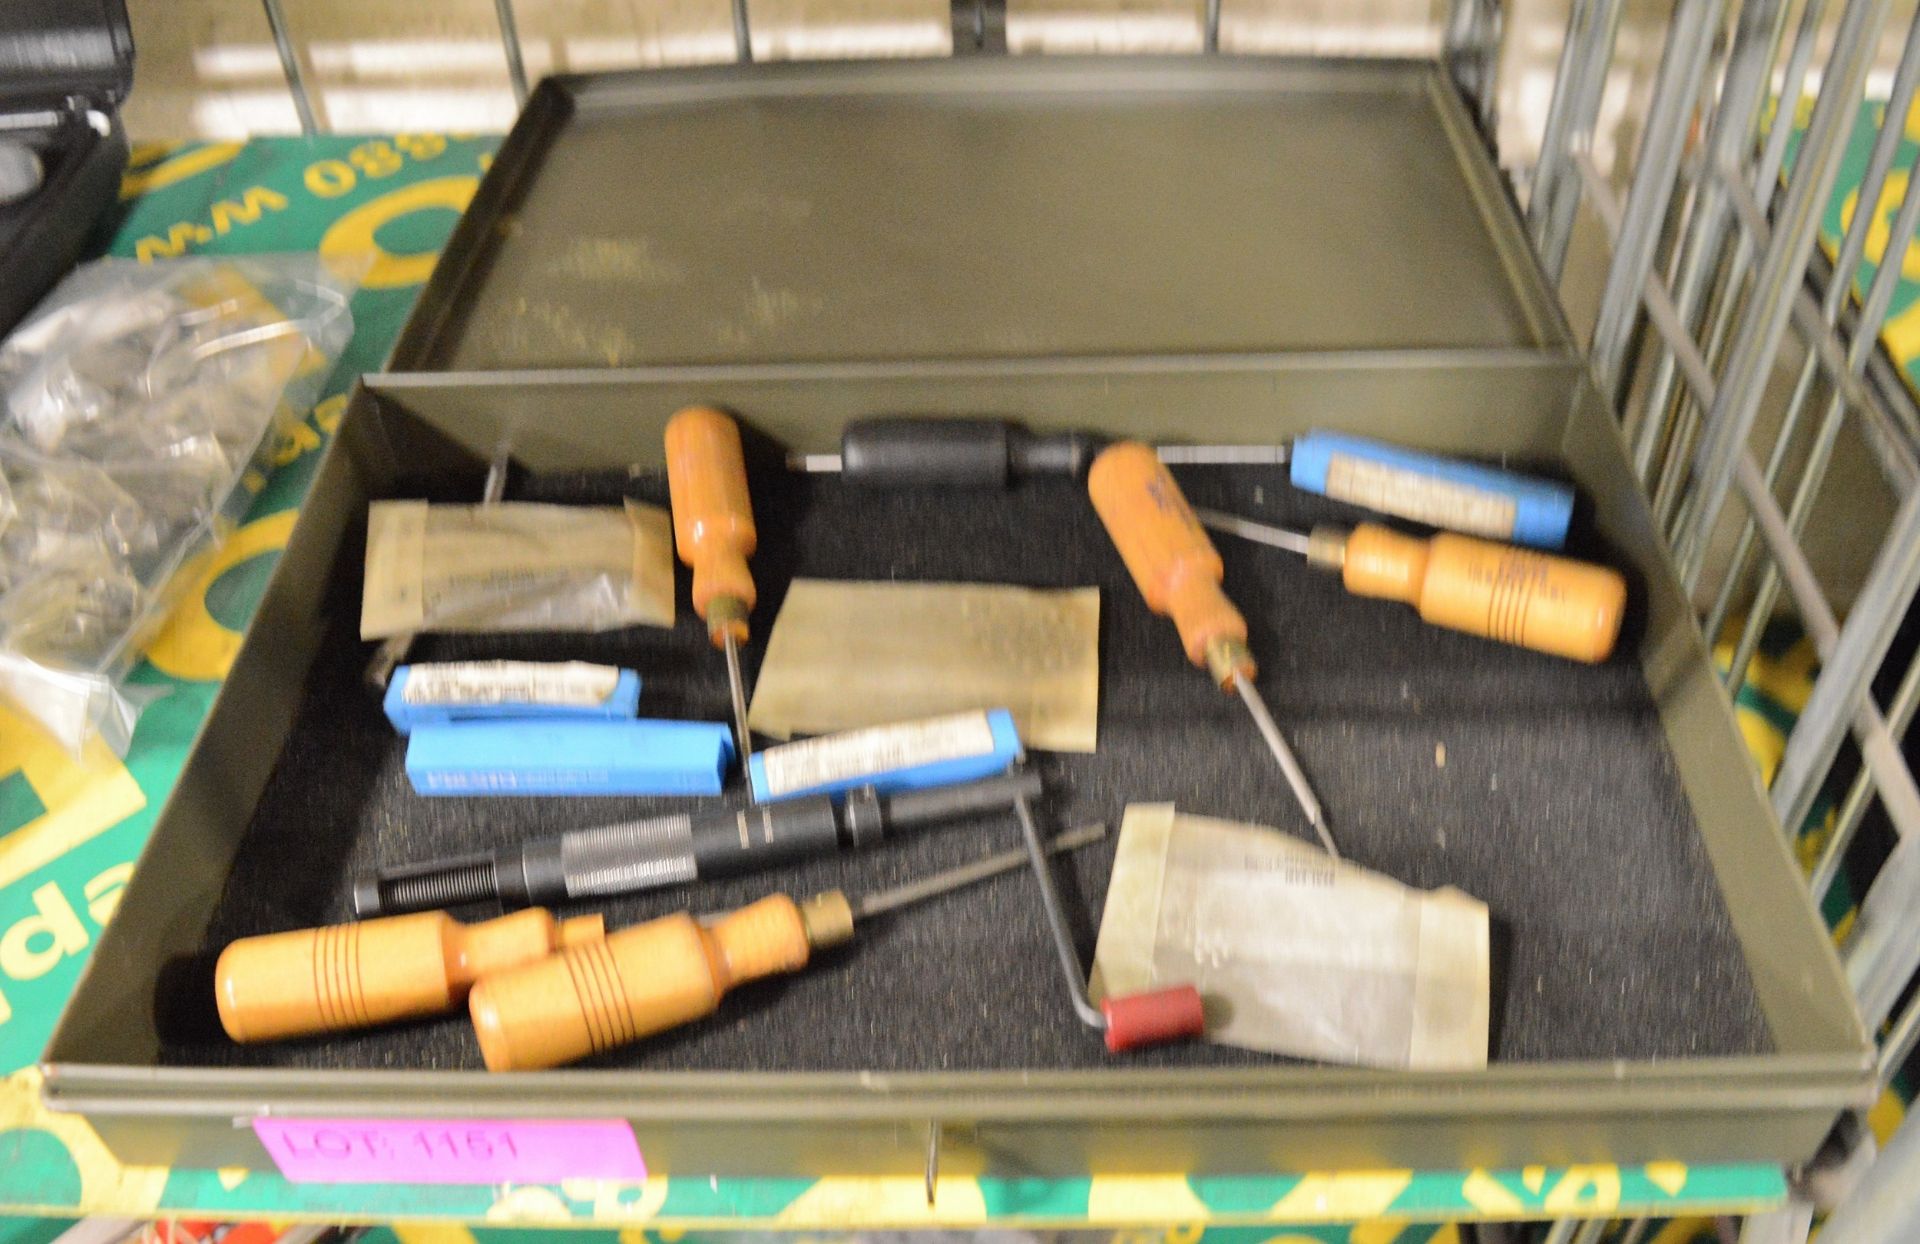 Insertion tool kit in carry box